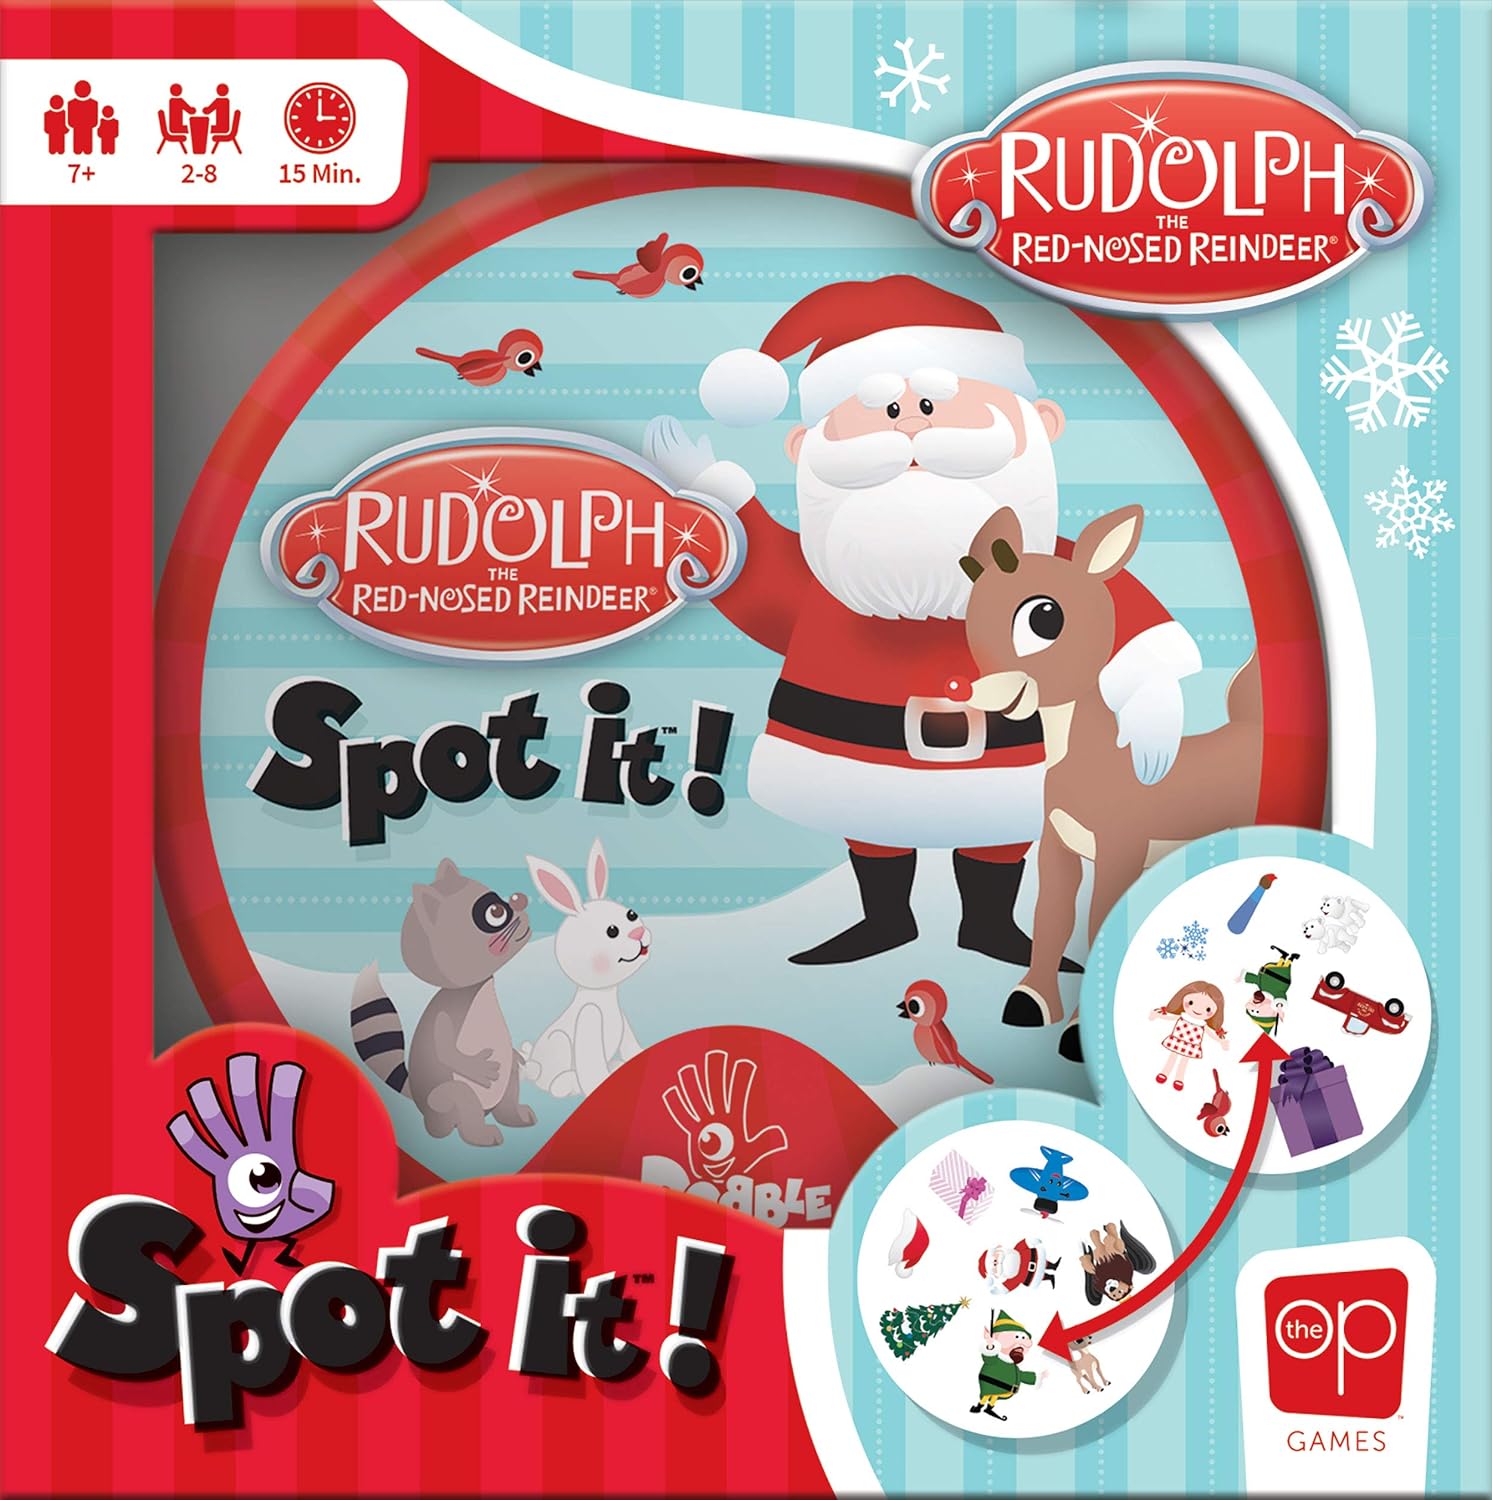 Spot It: Rudolph the Red-Nosed Reindeer